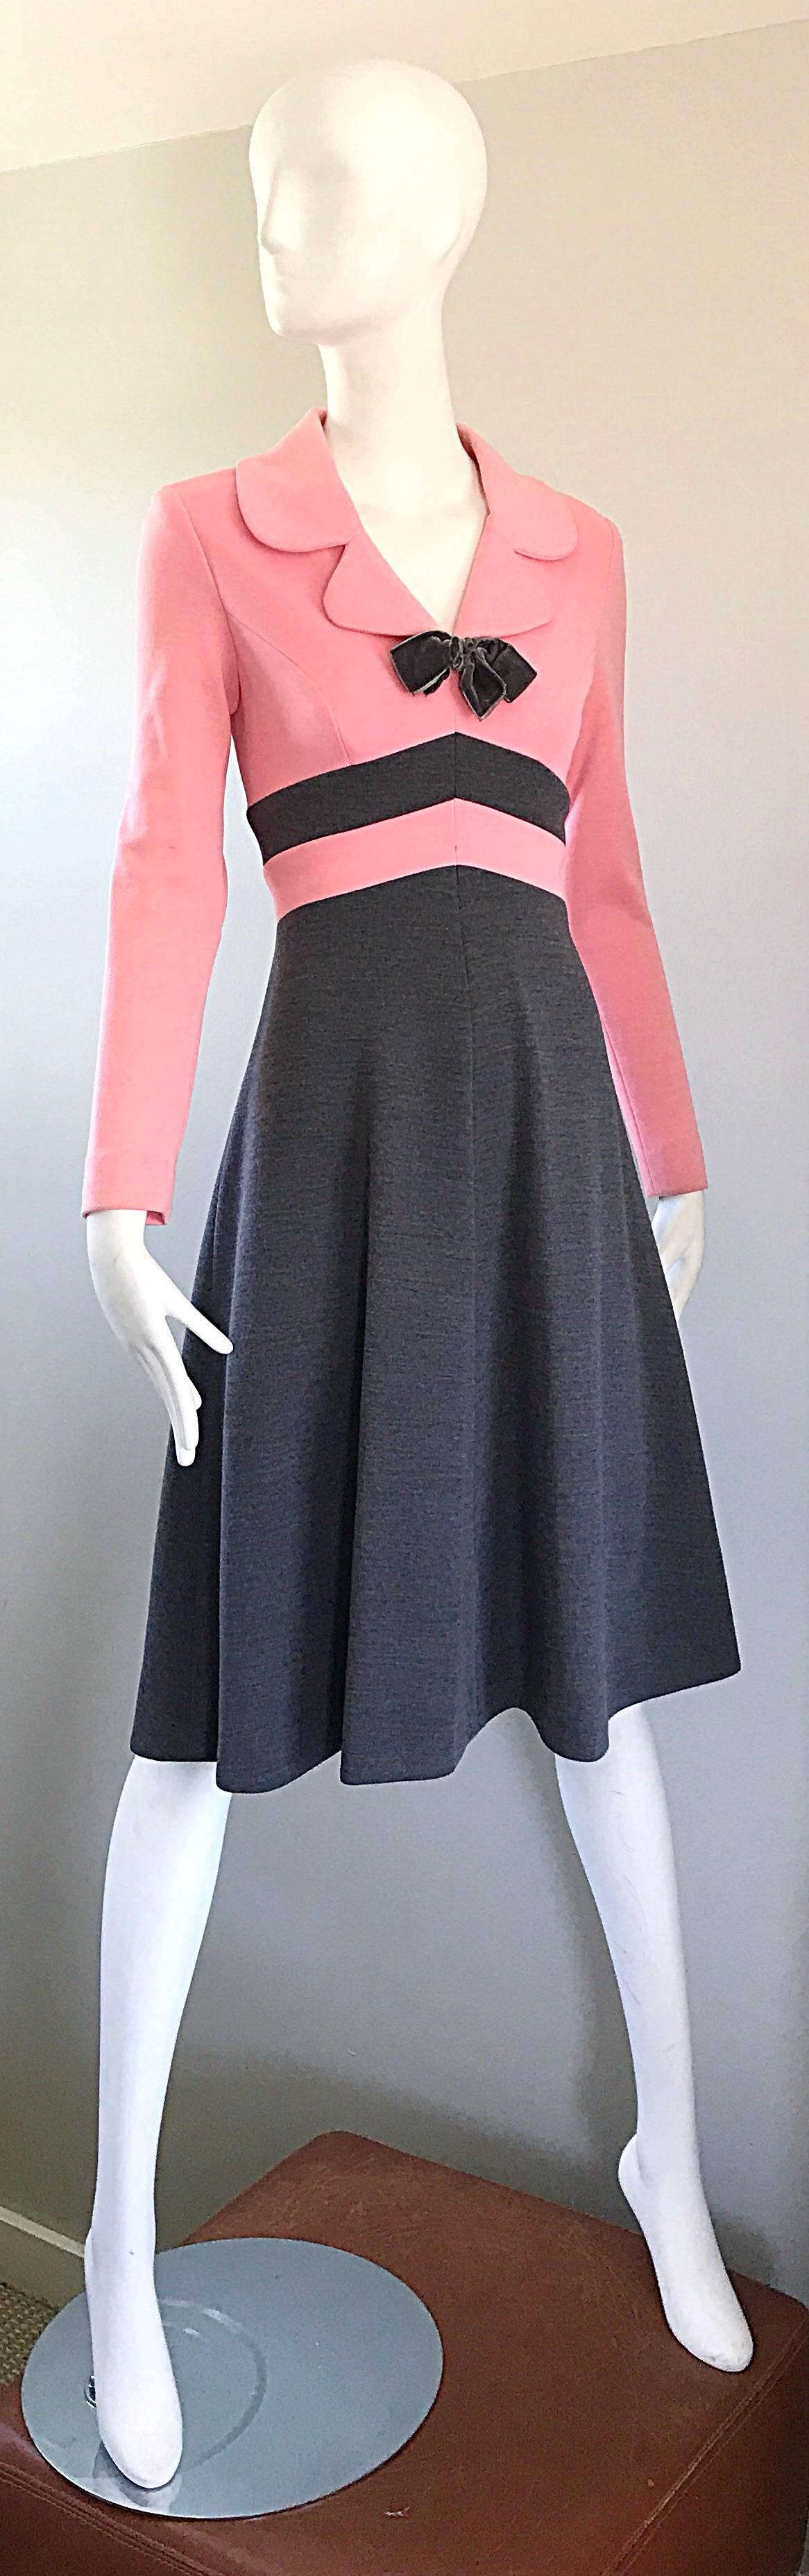 1960s Bubblegum Pink and Charcoal Gray Long Sleeve Vintage 60s Knit A Line Dress 1